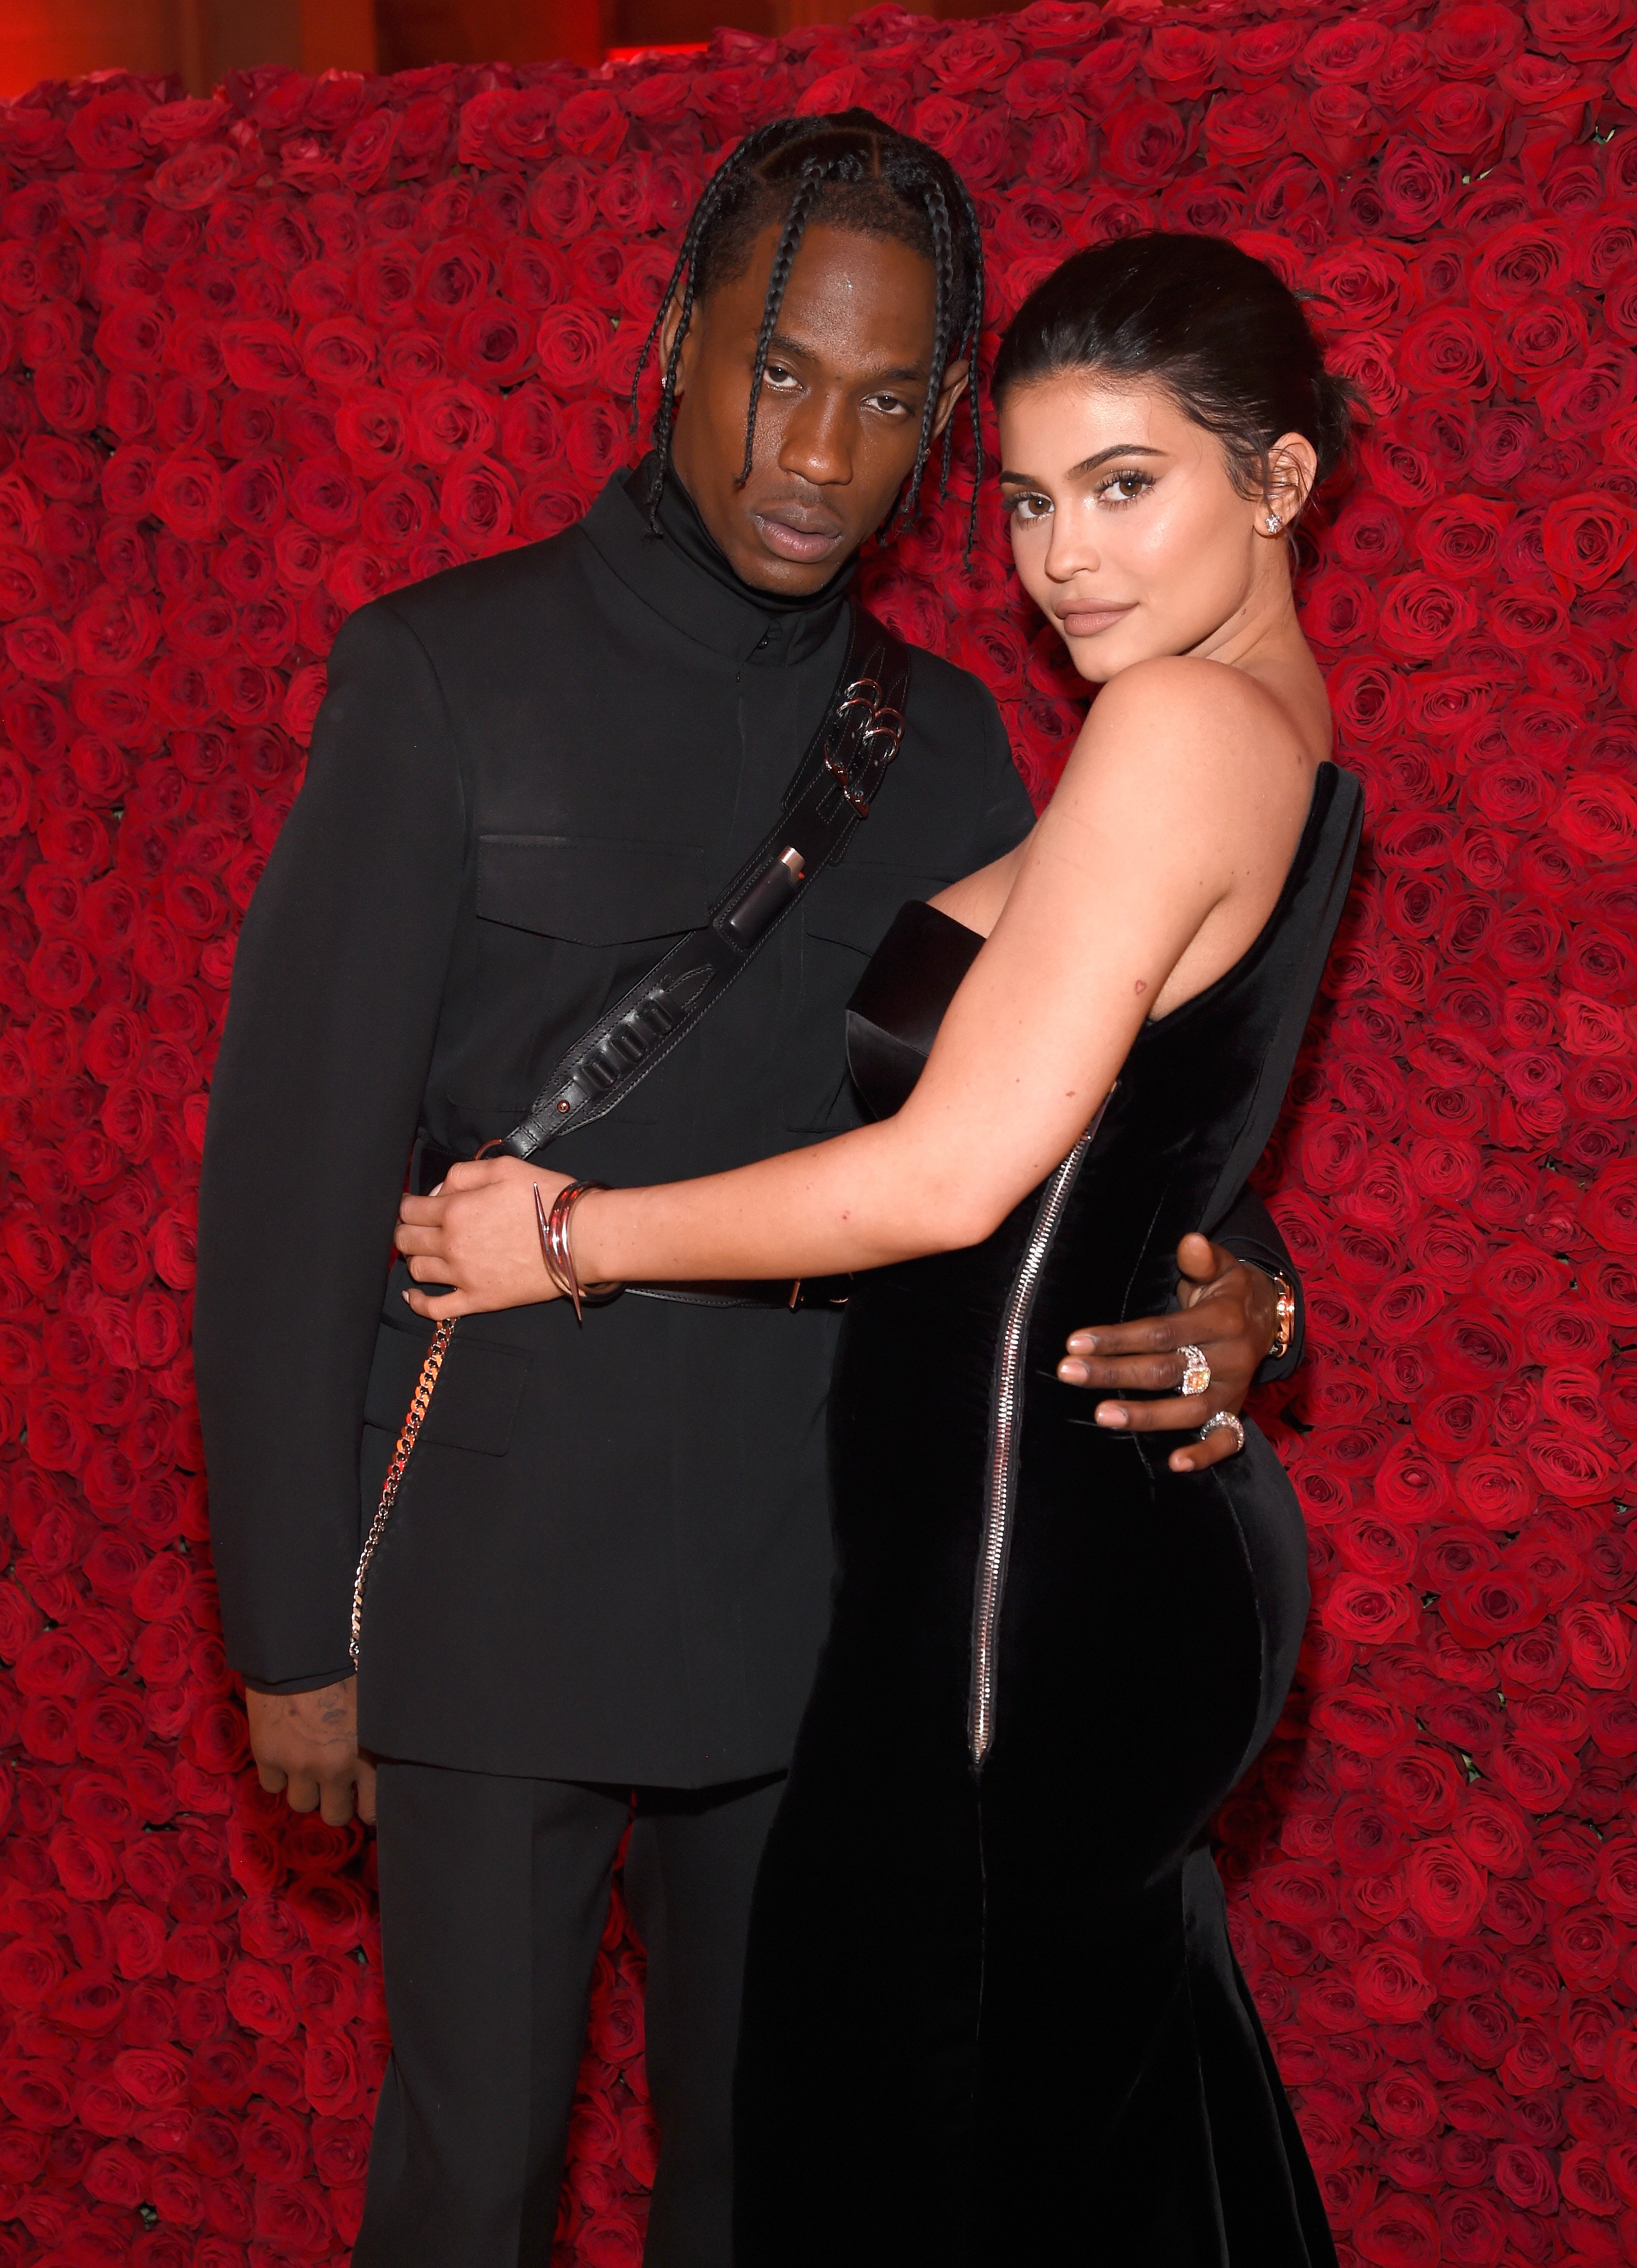 Travis Scott and Kylie Jenner attend the Heavenly Bodies: Fashion & The Catholic Imagination Costume Institute Gala on May 7, 2018, in New York City. | Source: Getty Images.